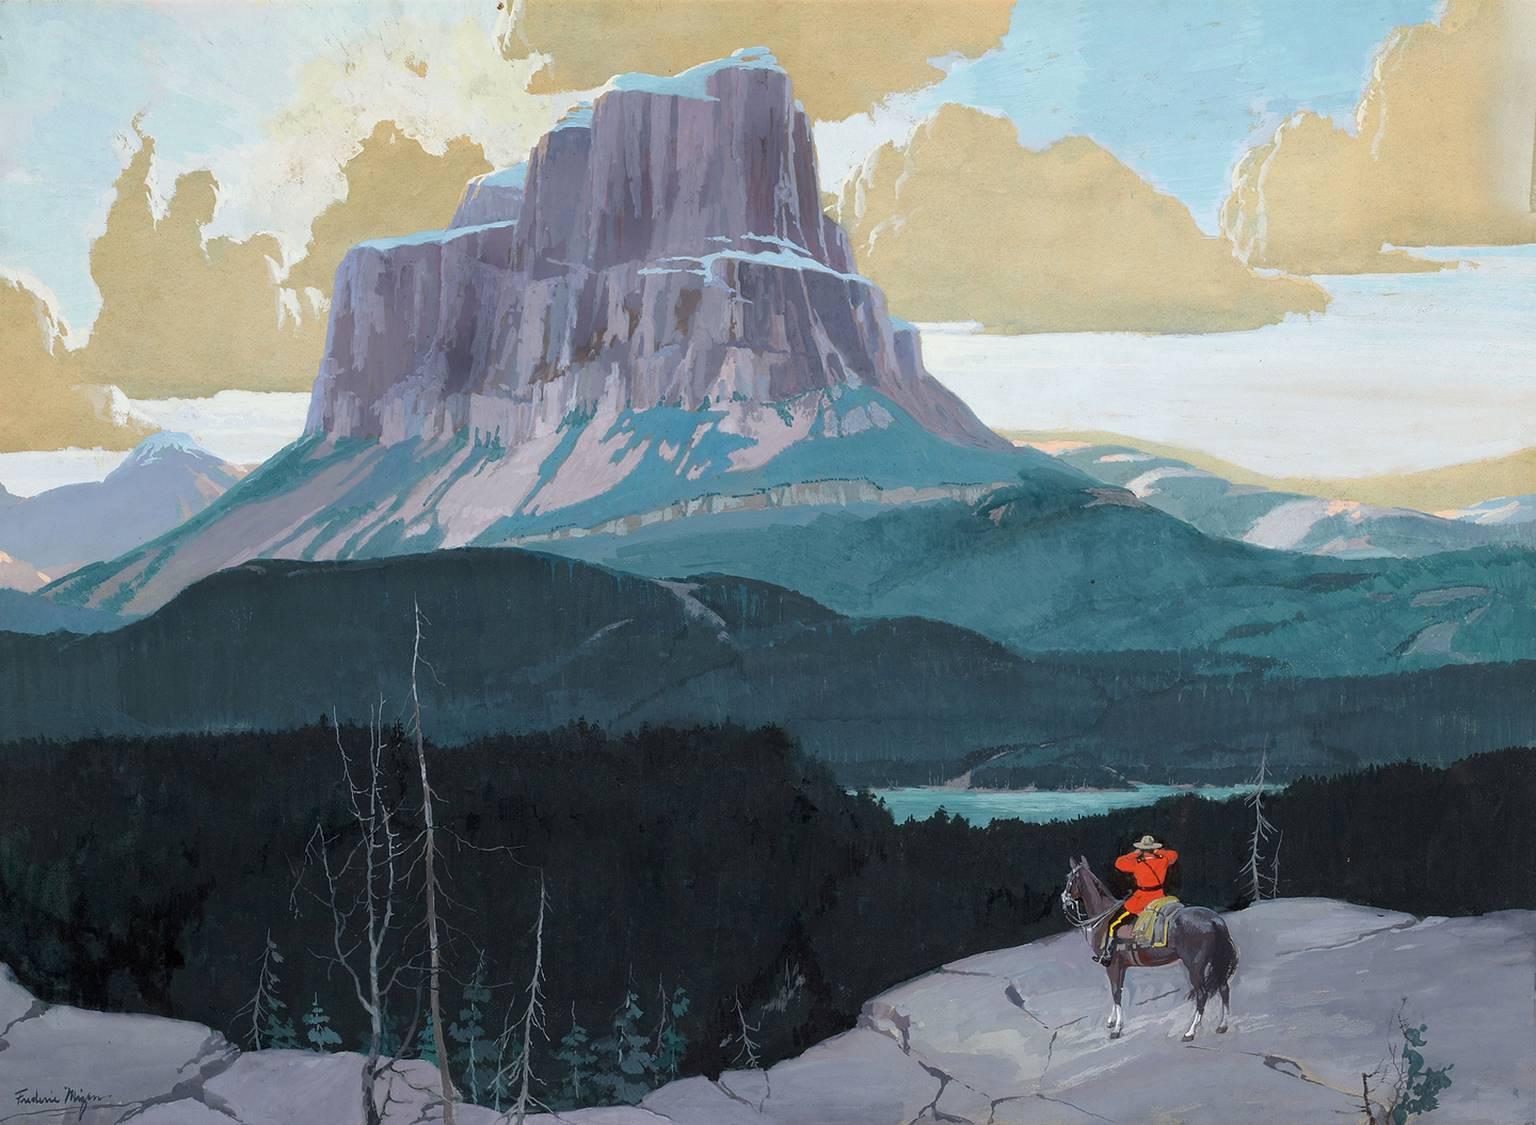 FREDERIC KIMBALL MIZEN Landscape Painting - CanadianMountie Gazing at Butte